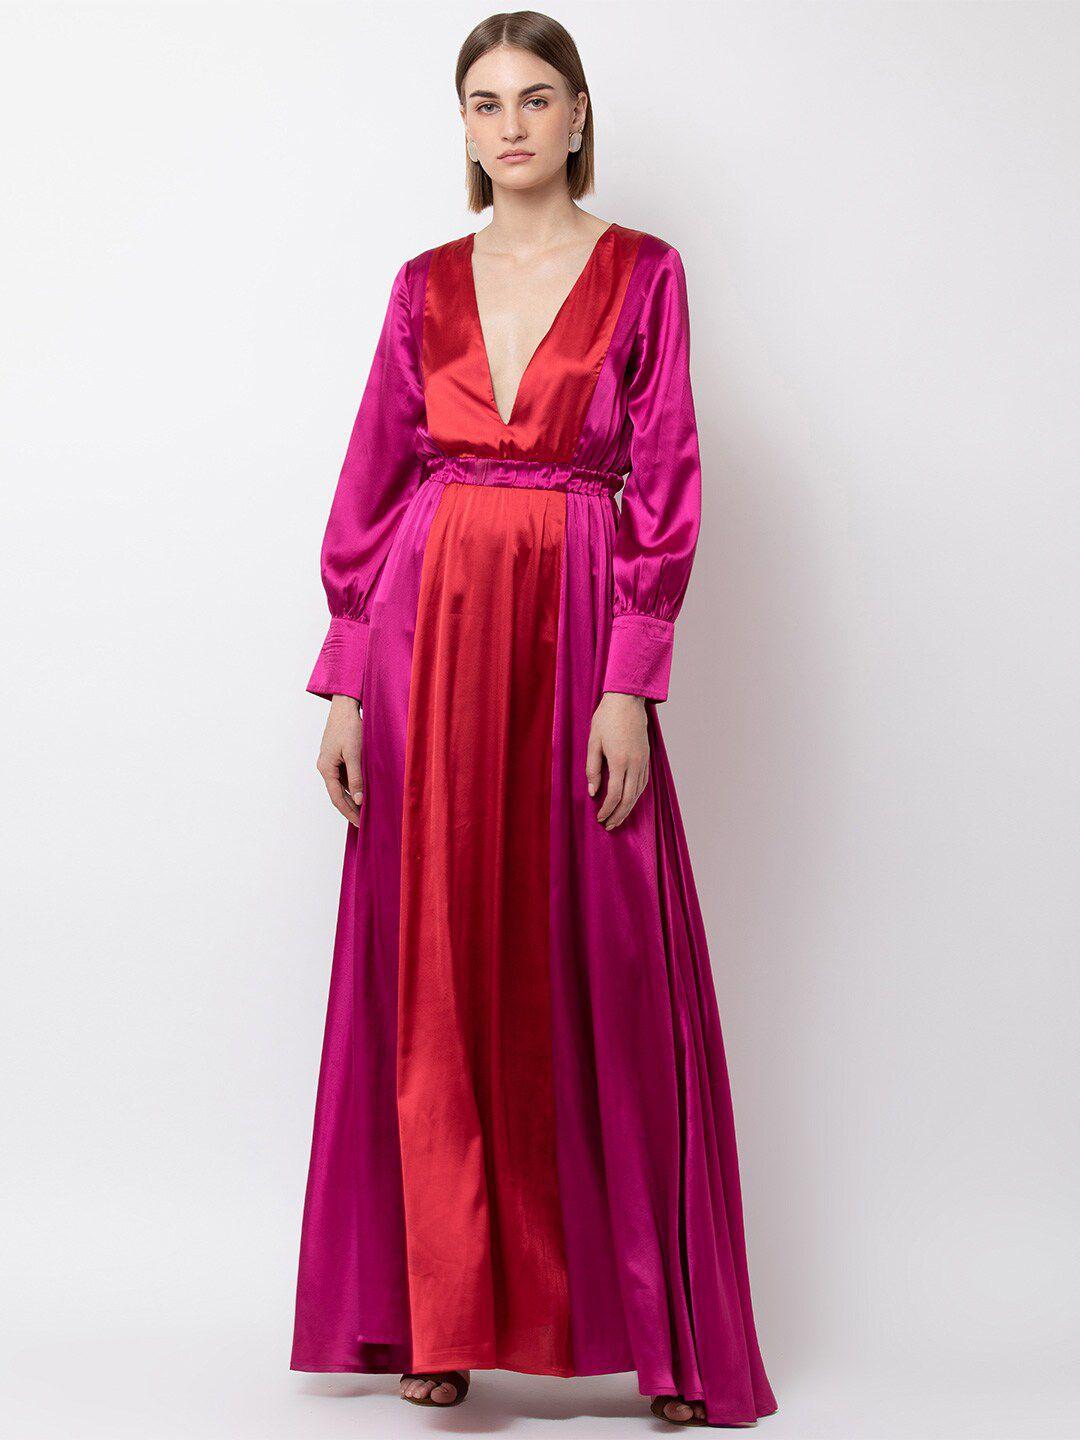 dodo-&-moa-women-pink-&-red-solid-cuff-sleeves-maxi-dress